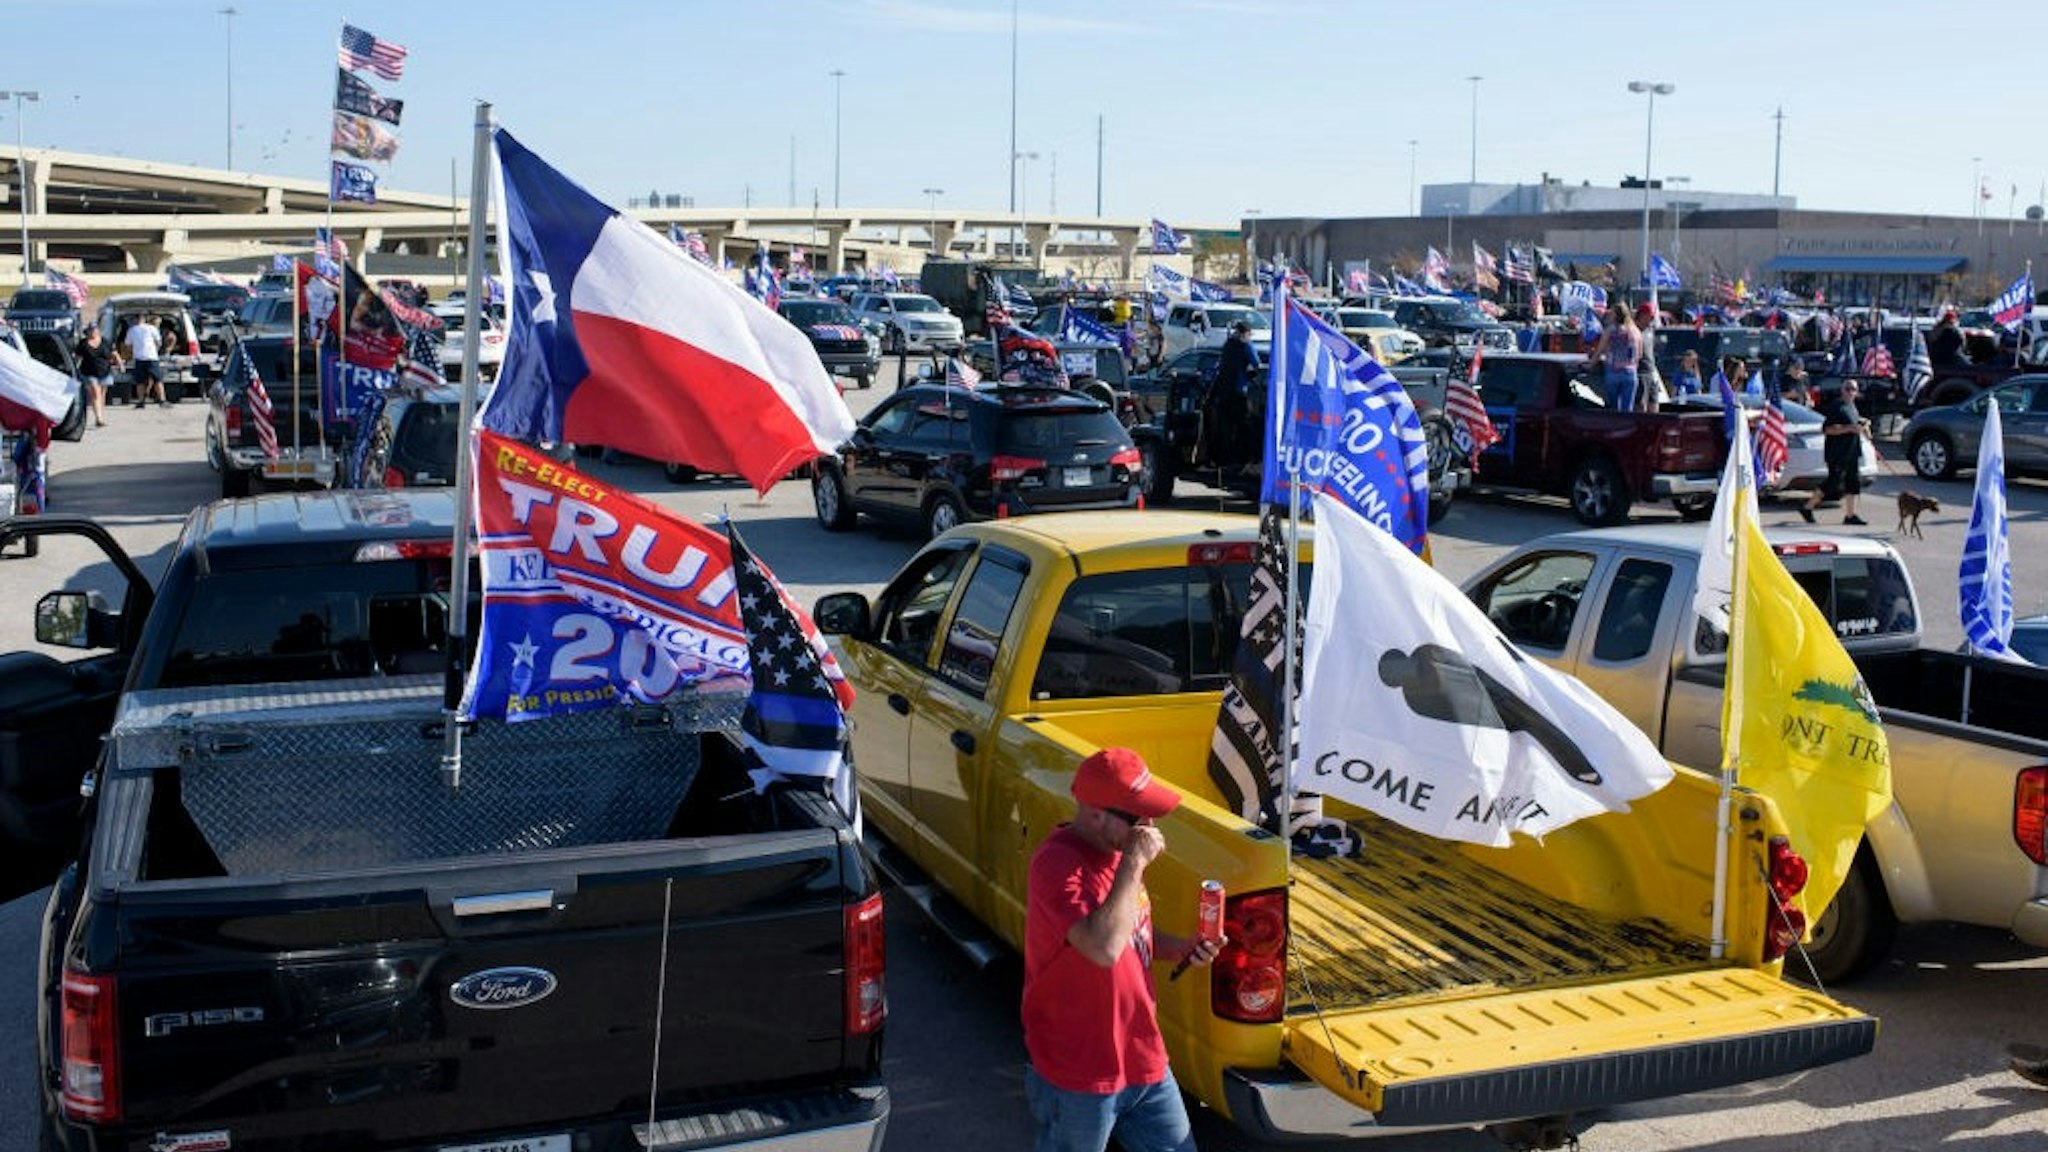 HOUSTON, TX - NOVEMBER 1: Attendees gathered together during the MAGA Drag The Interstate Houston Trump Rally in Houston, Texas on November 1, 2020. (Photo by